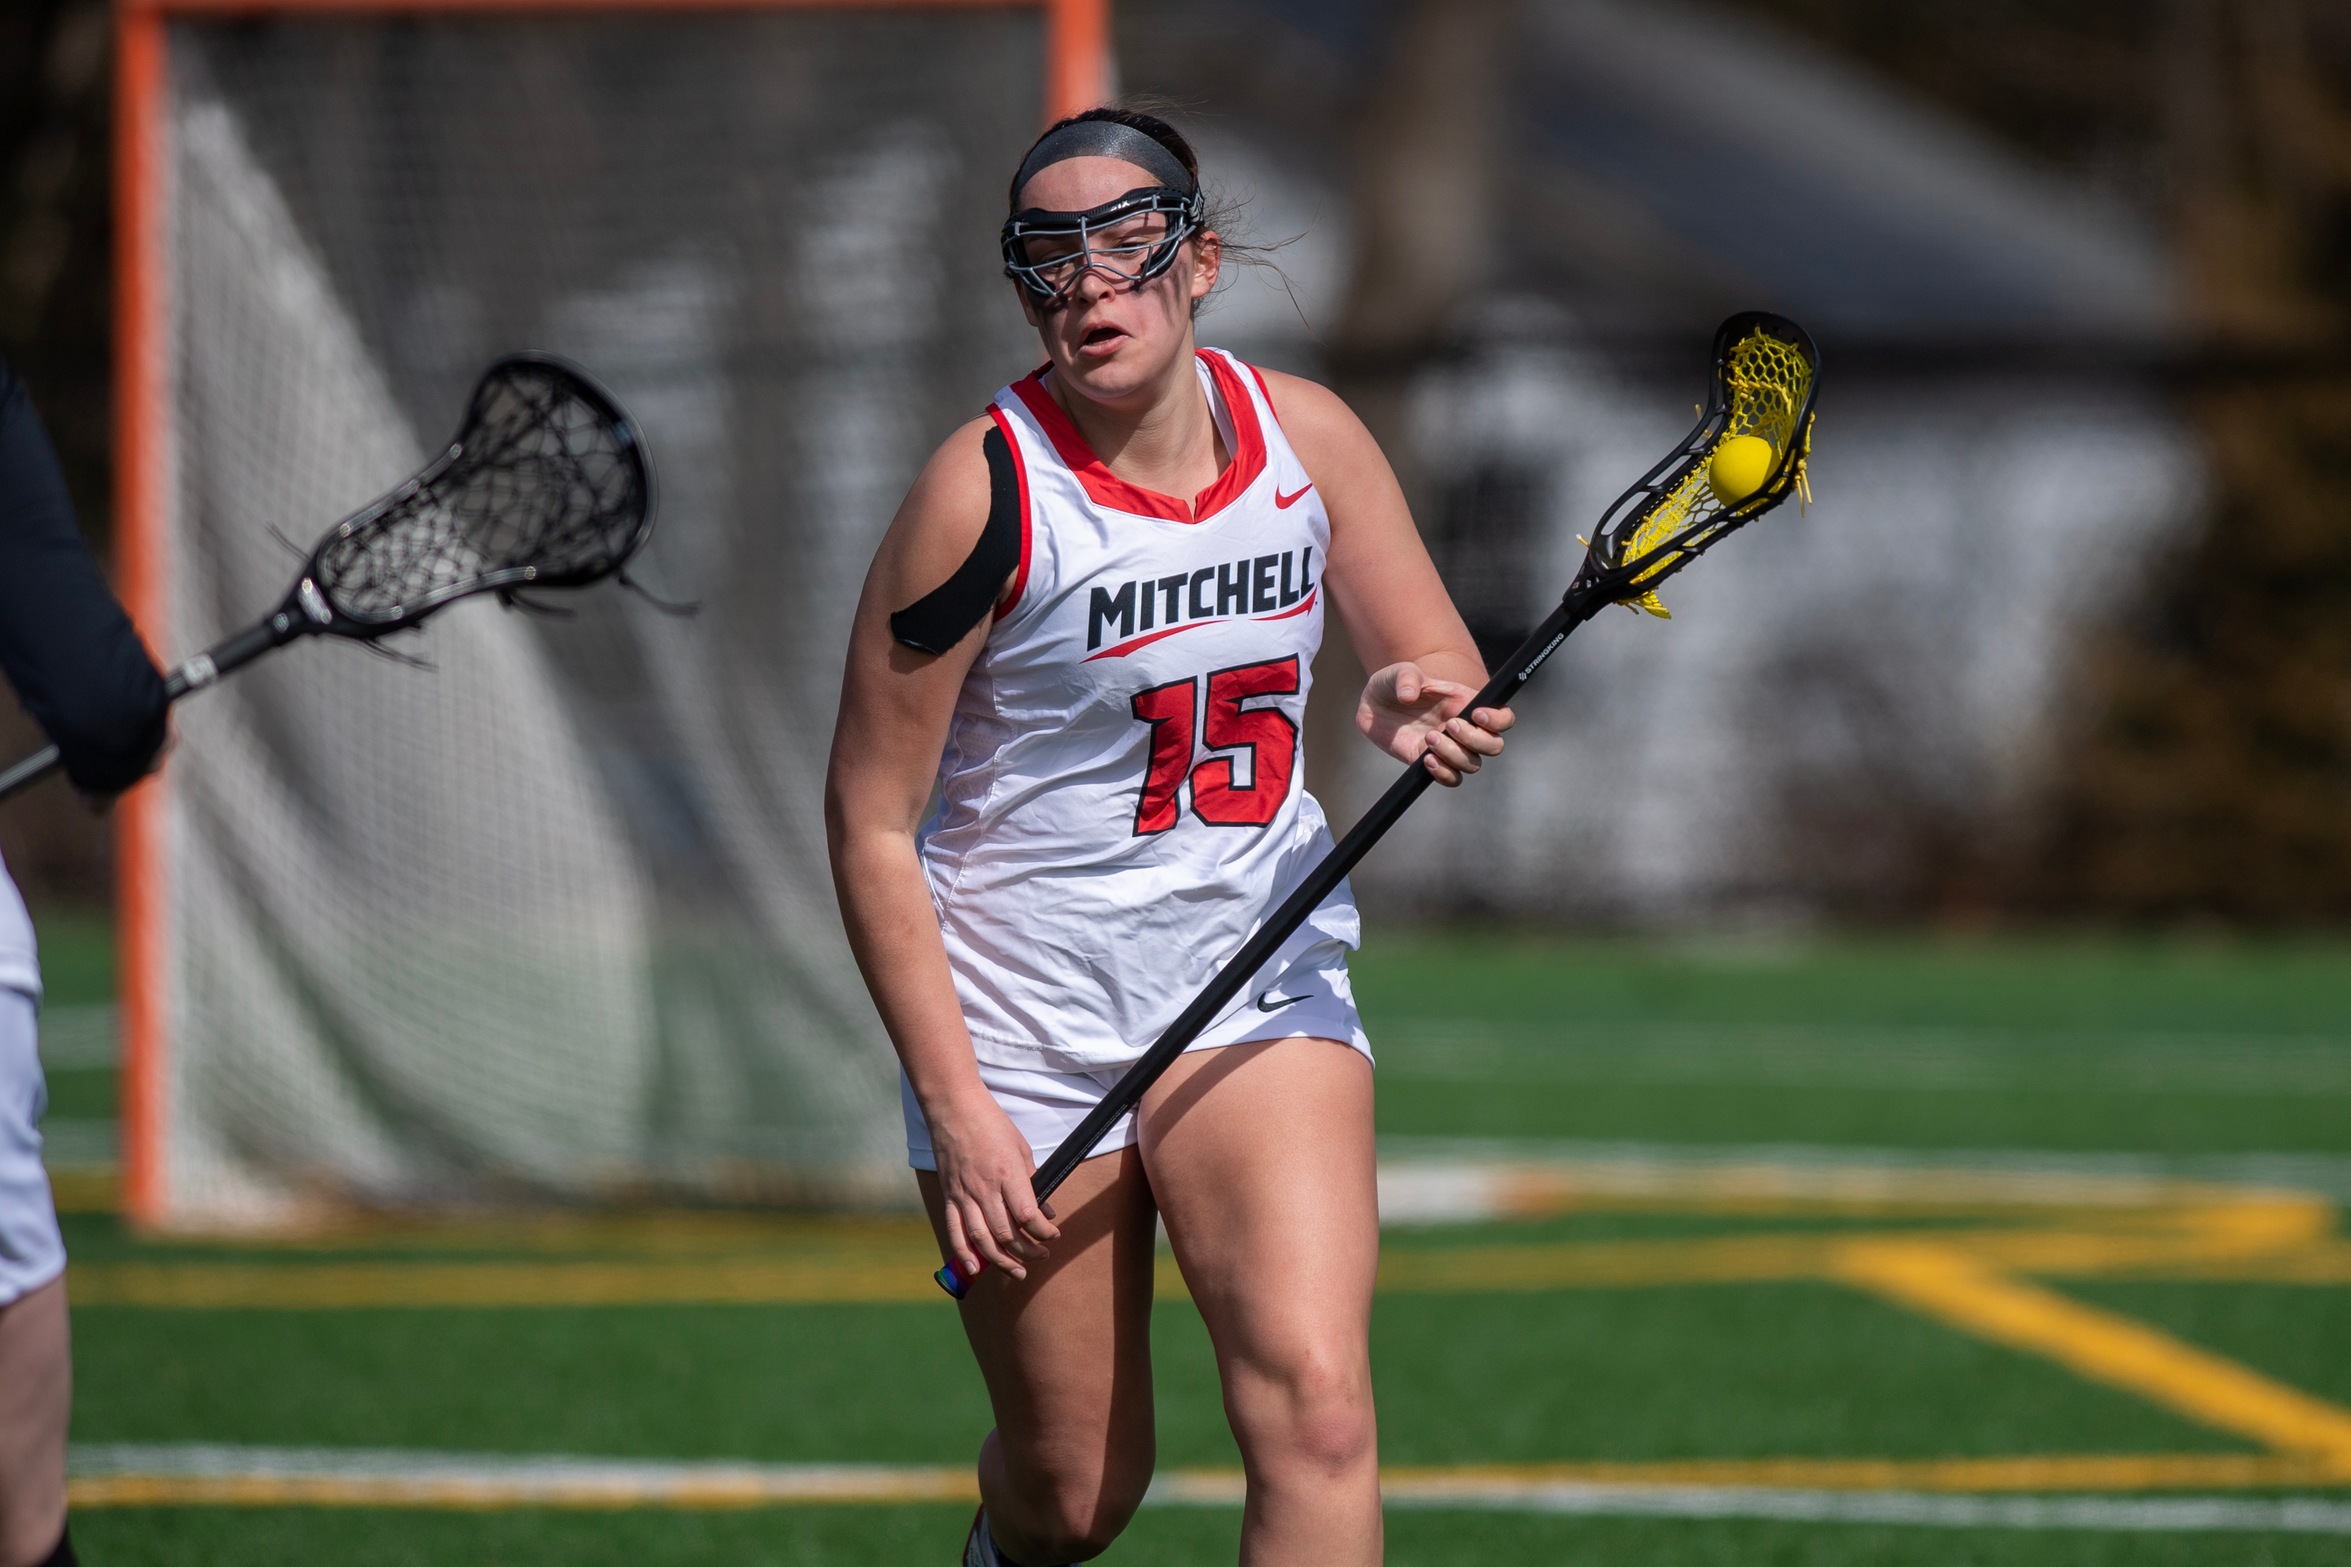 WLAX Rallies From Four Goal Deficit to Upend Purchase